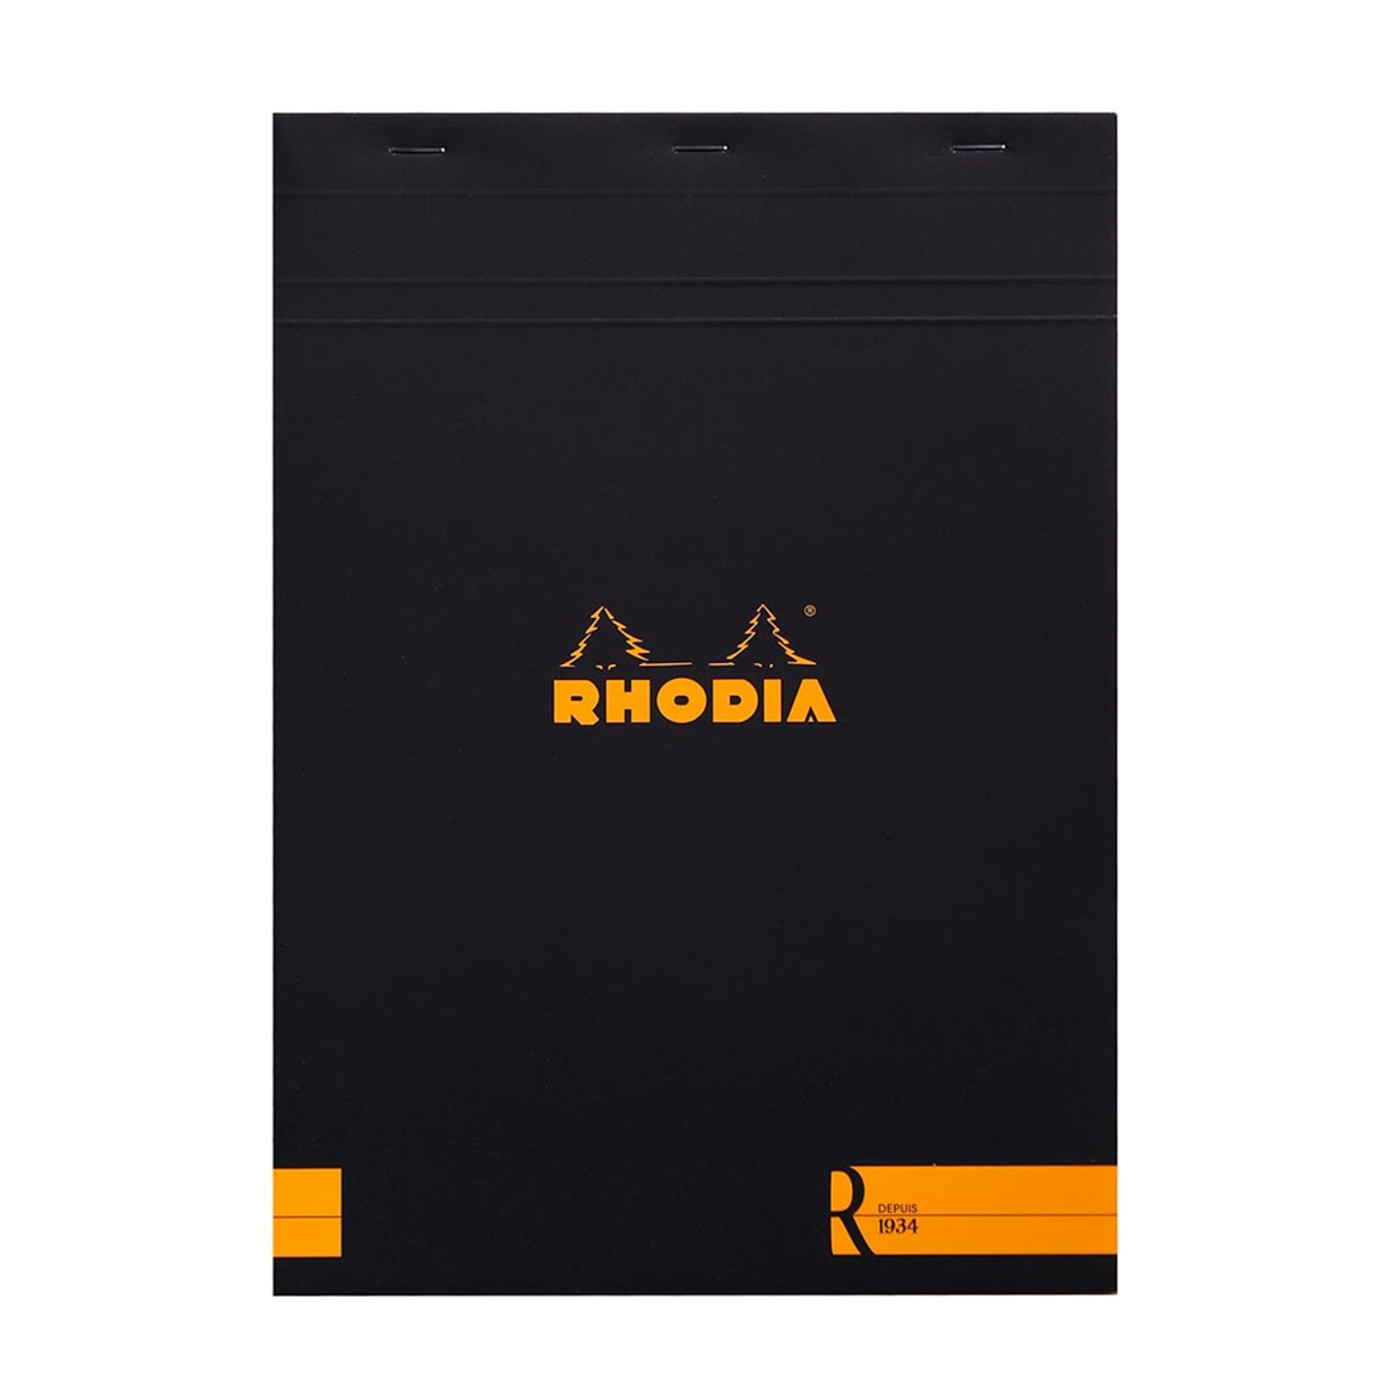 R by Rhodia premium bloc pad No.18 (A4) LINED